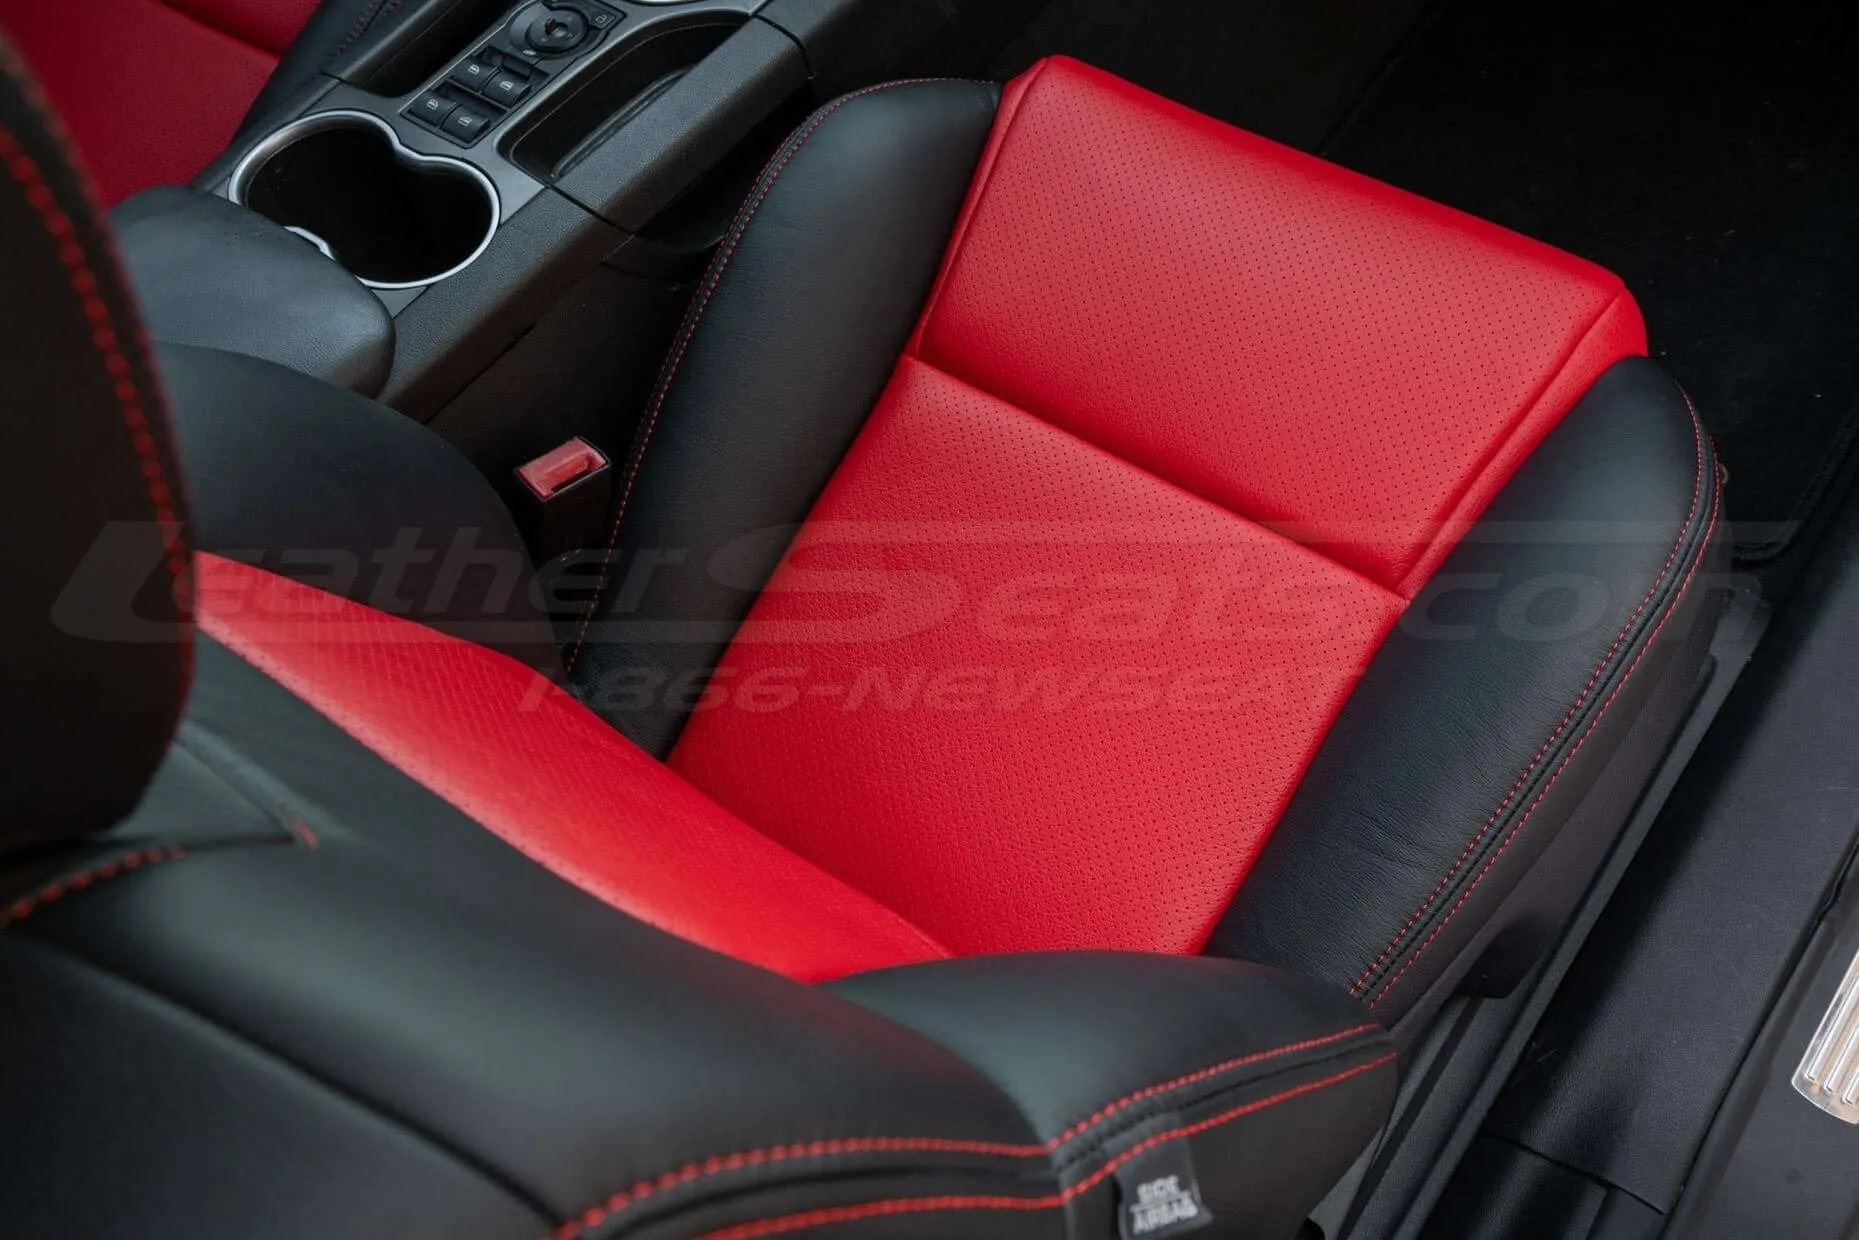 Top down view of Perforated Bright Red seat cushion